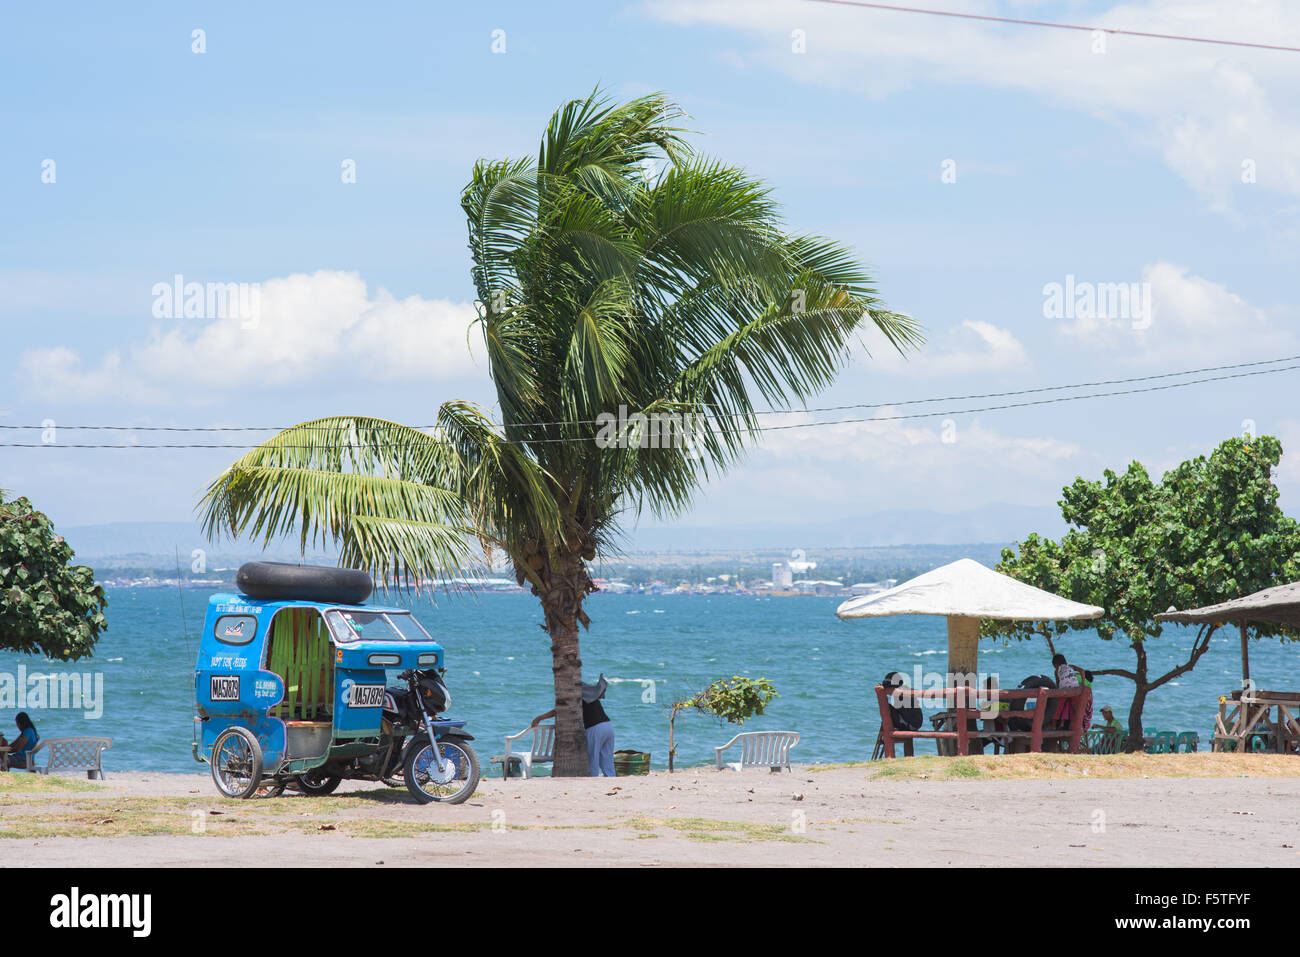 Cyclo parked at the beach in General Santos City, the southernmost city of The Philippines. Stock Photo